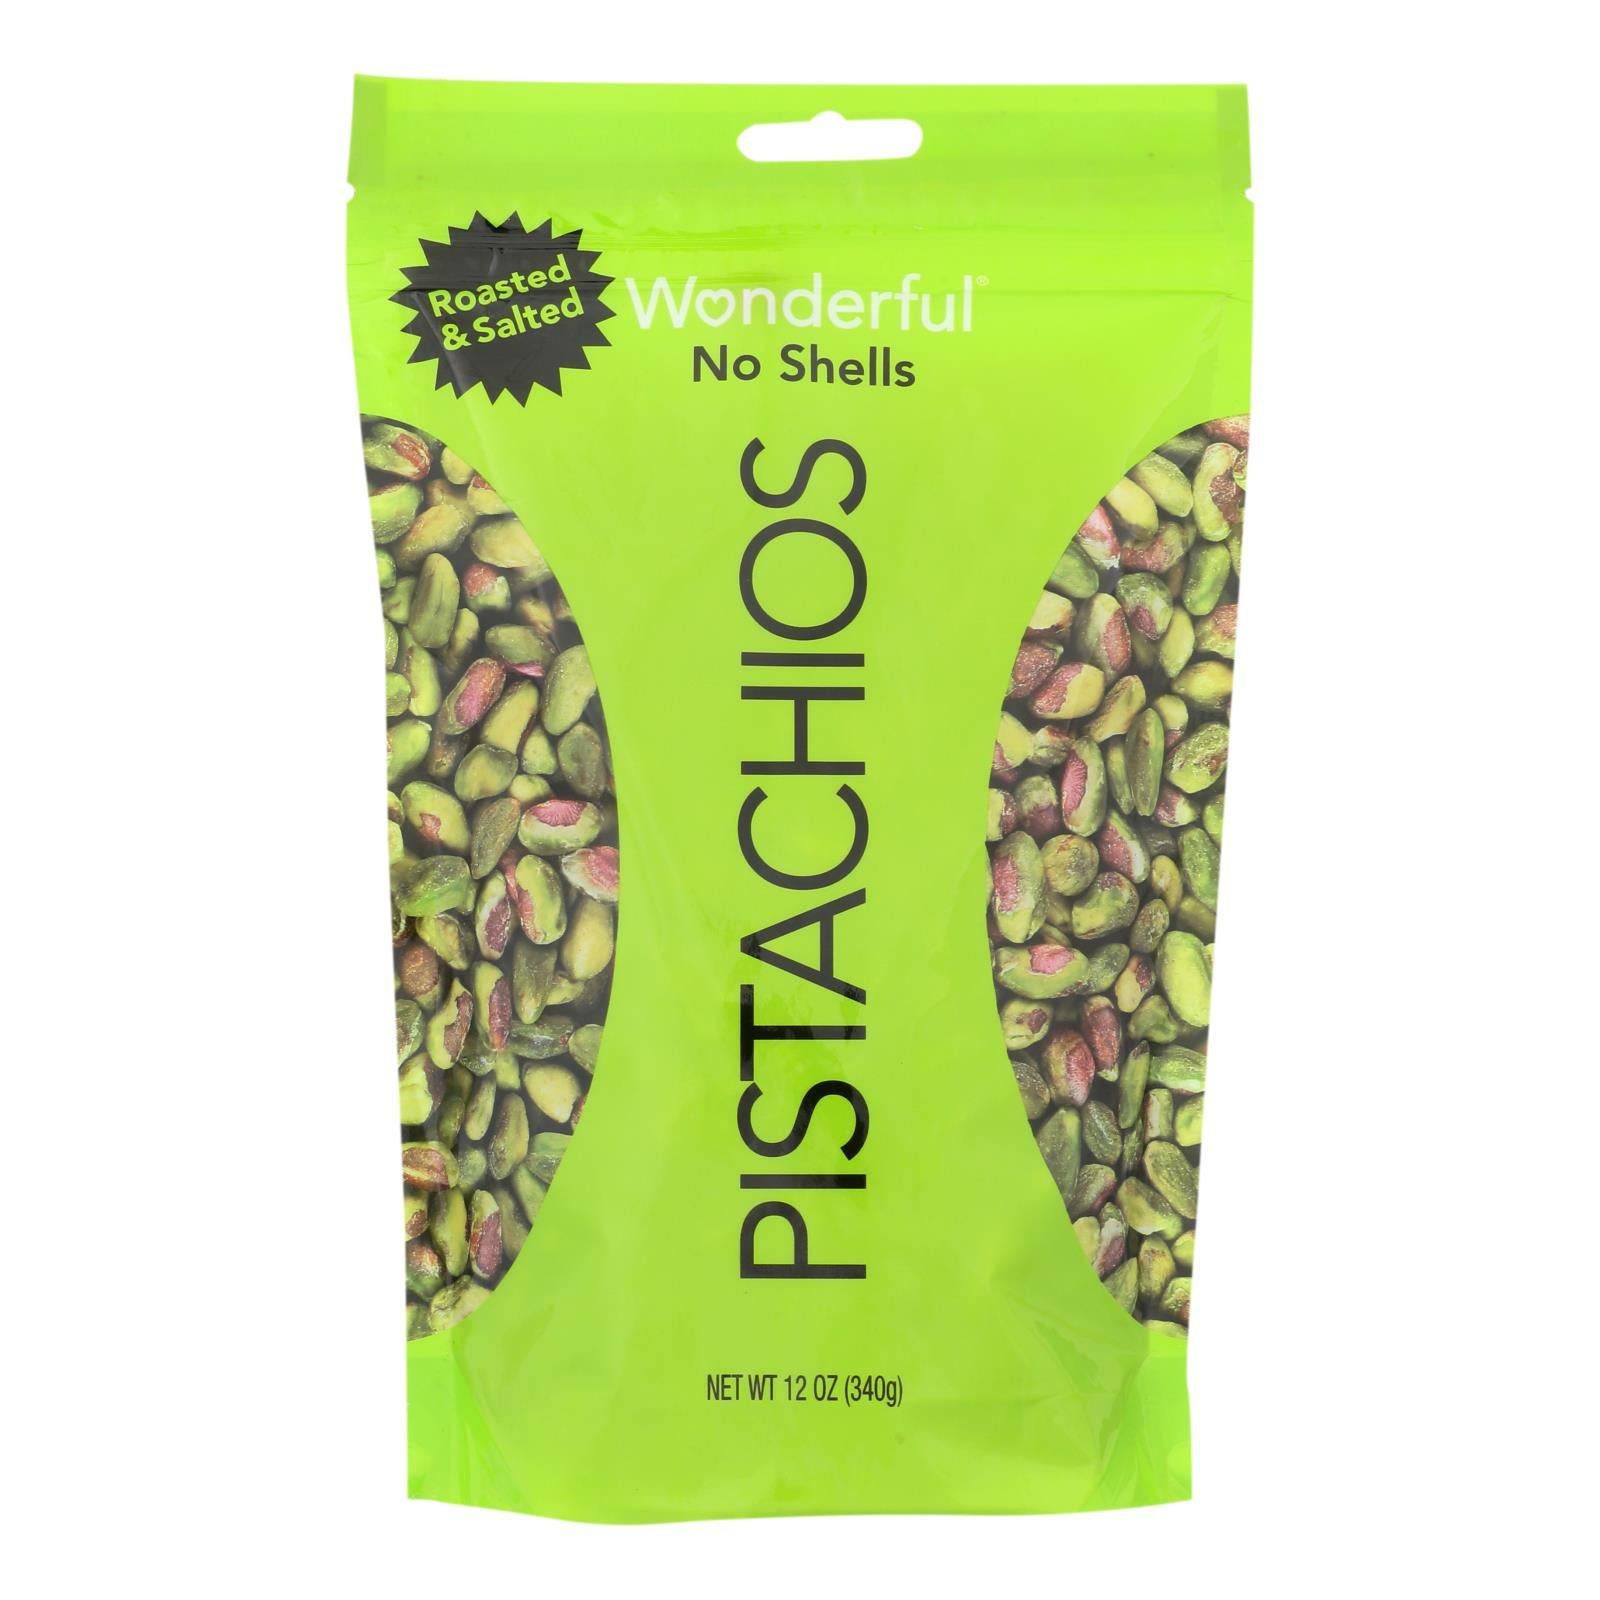 Buy Wonderful Pistachios Roasted & Salted Pistachios - Case Of 12 - 12 Oz  at OnlyNaturals.us